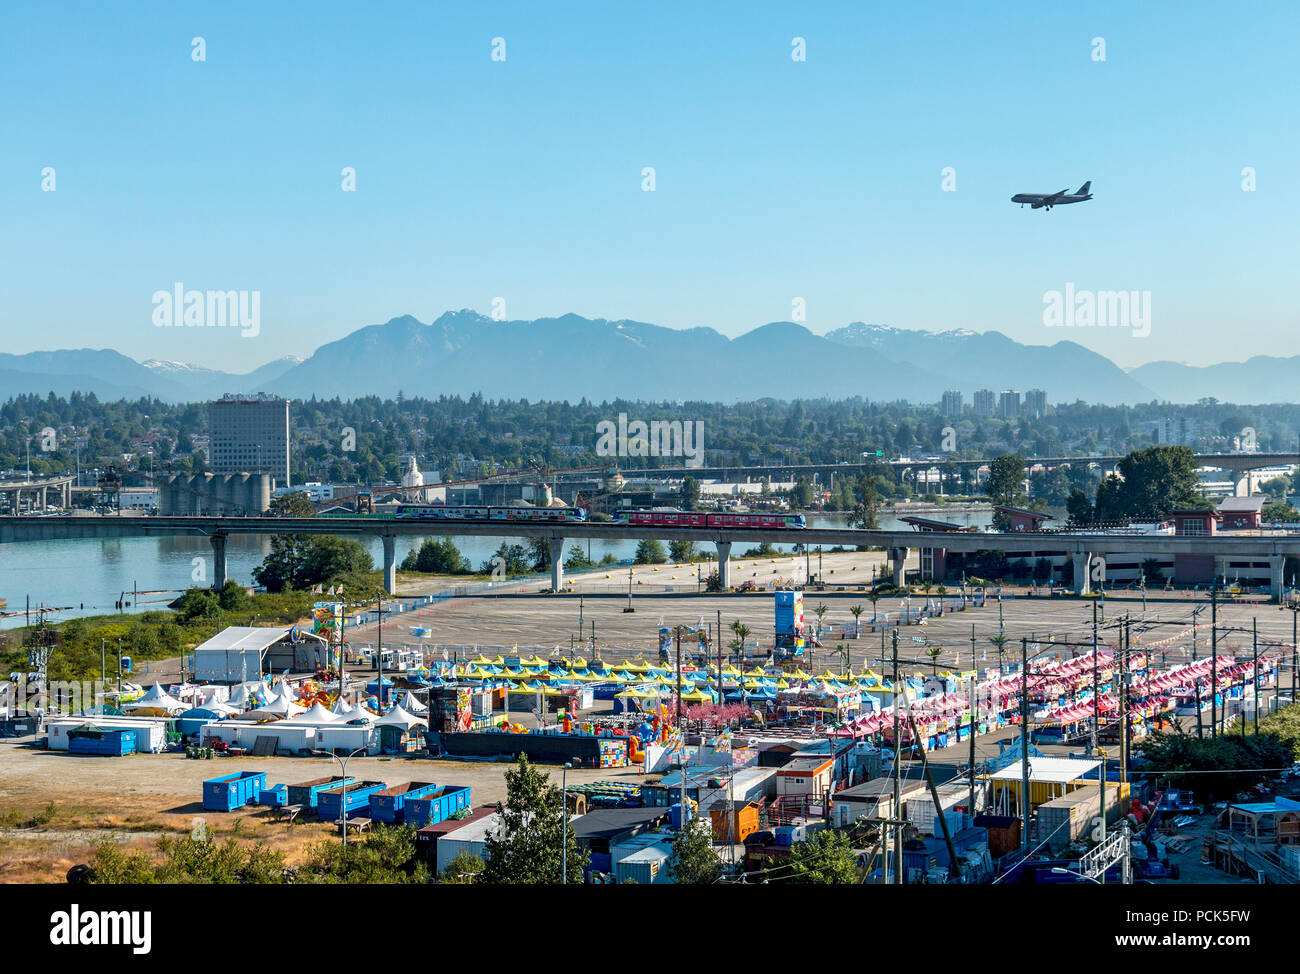 Richmond Night Market by day. Fraser River is on left. Richmond, BC, Canada. Canada Line Skytrain can be seen on its route between downtown Vancouver and Vancouver International Airport. And a jet can be seen on its landing approach to the airport.The market is open weekends and holiday Mondays during summer. Stock Photo